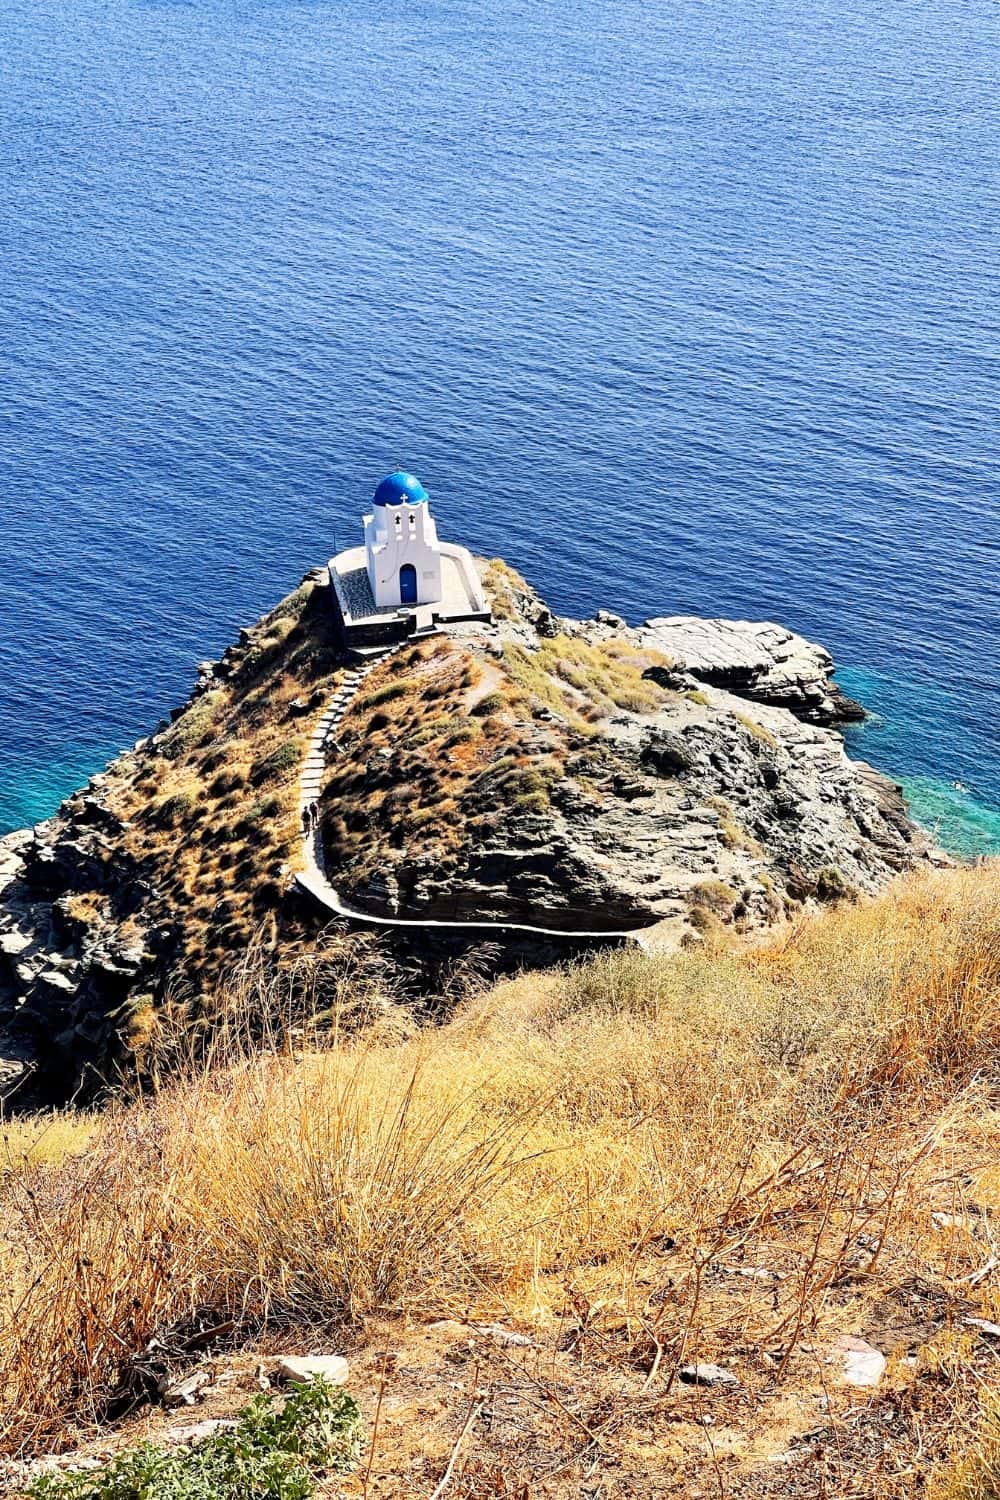 A solitary white church with a striking blue dome sits at the edge of a rocky promontory in Sifnos, overlooking the deep blue sea. The sun casts a brilliant light on the arid landscape, highlighting the rugged beauty of the island's coastline.